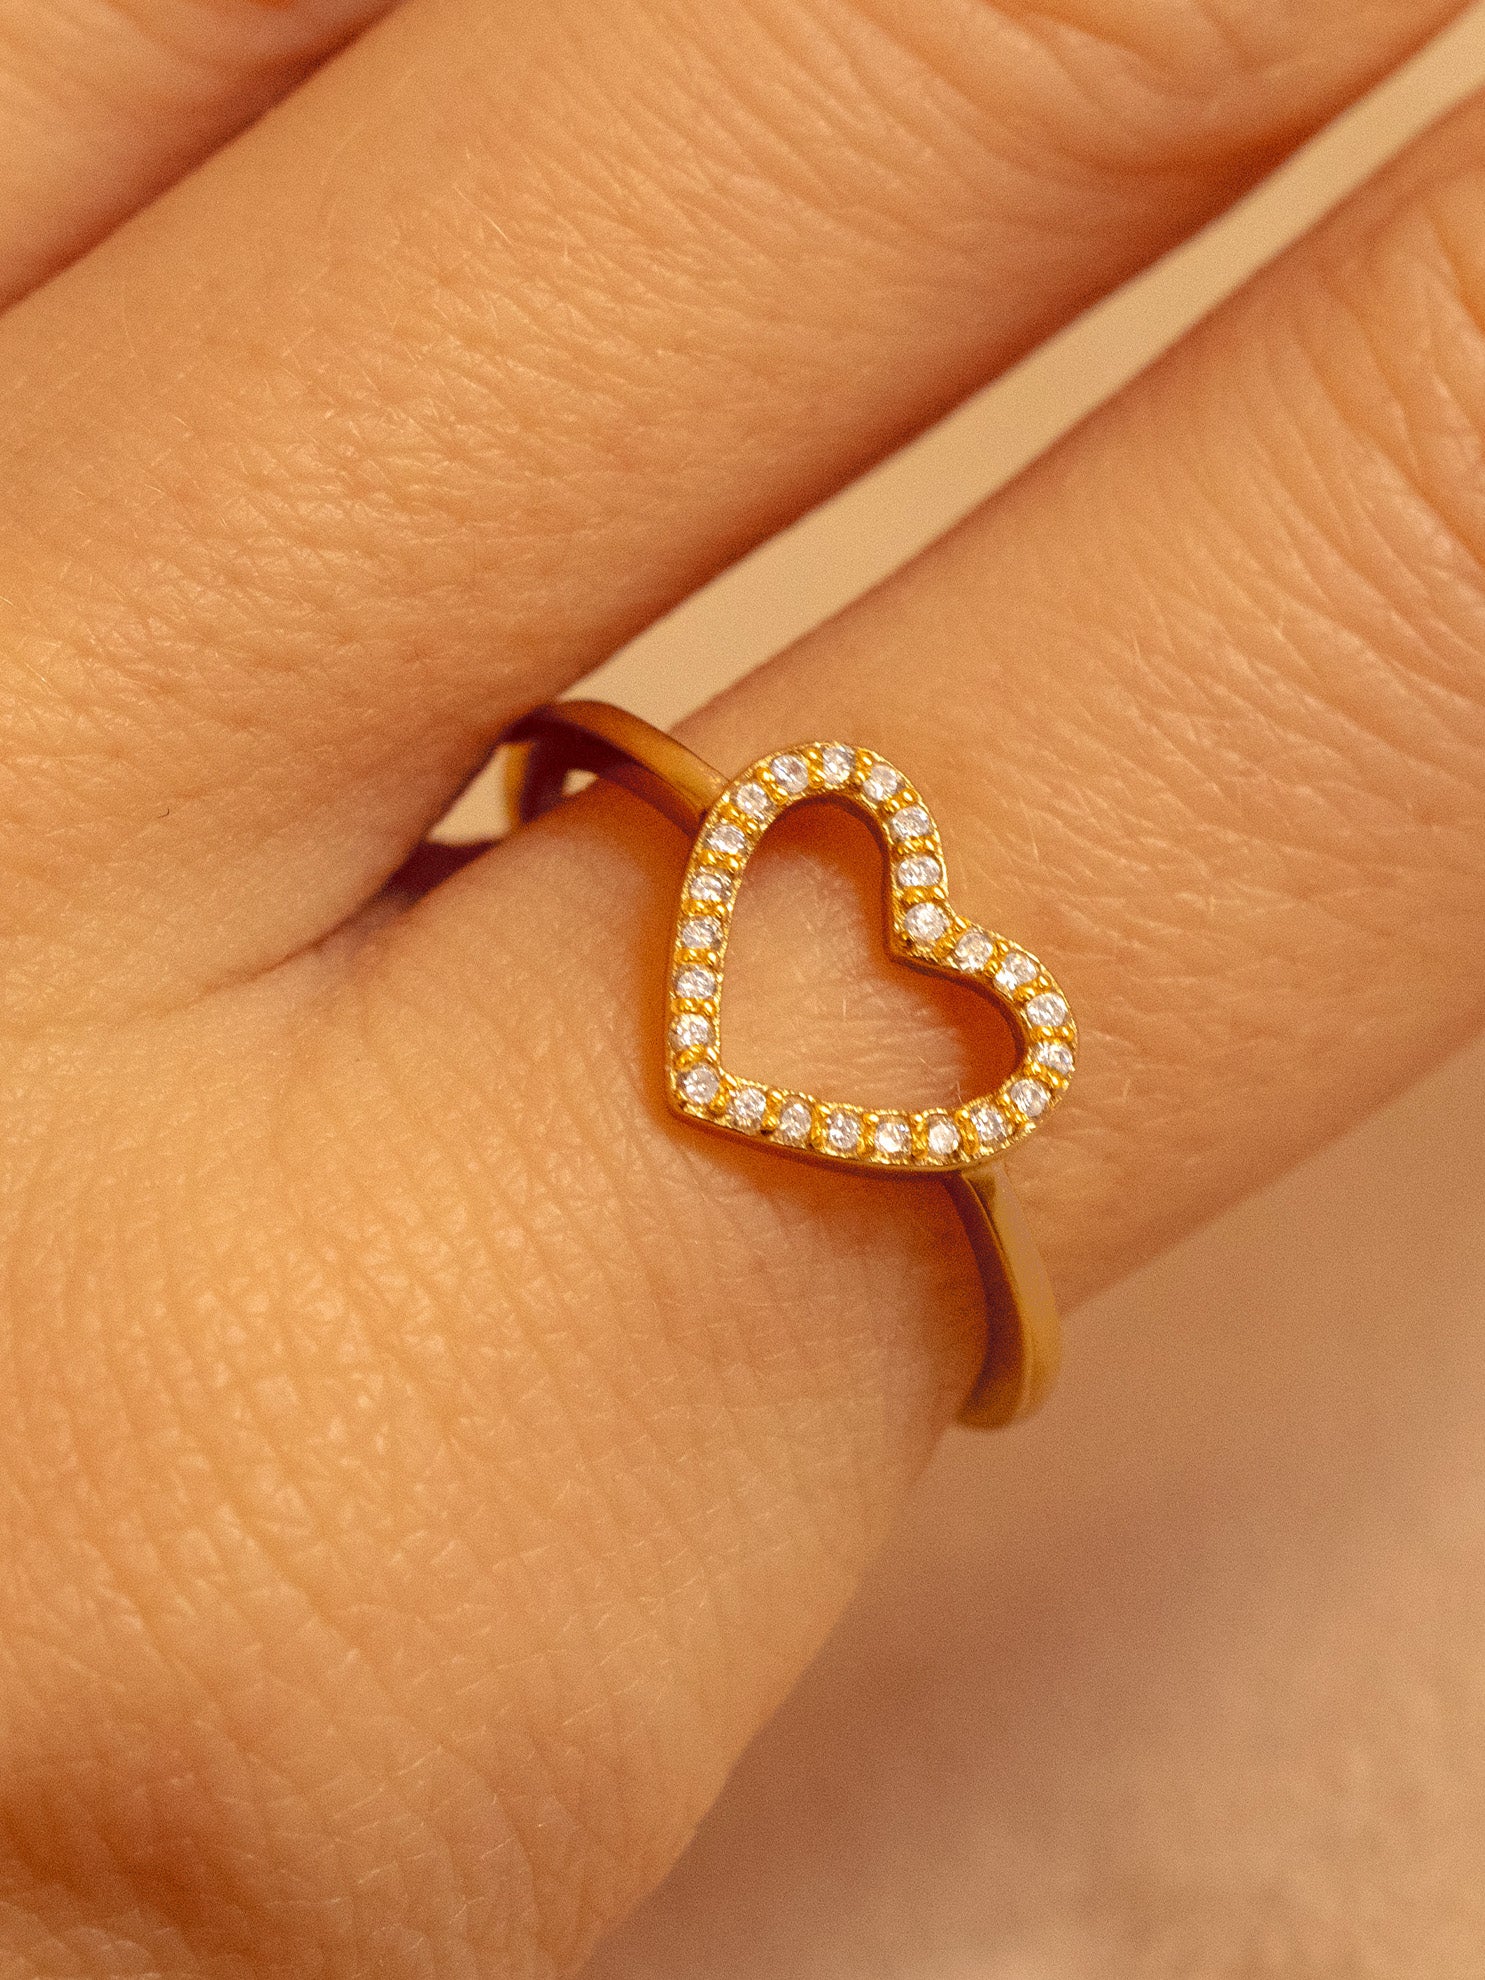 Gold Ring With Small Sparkling Heart